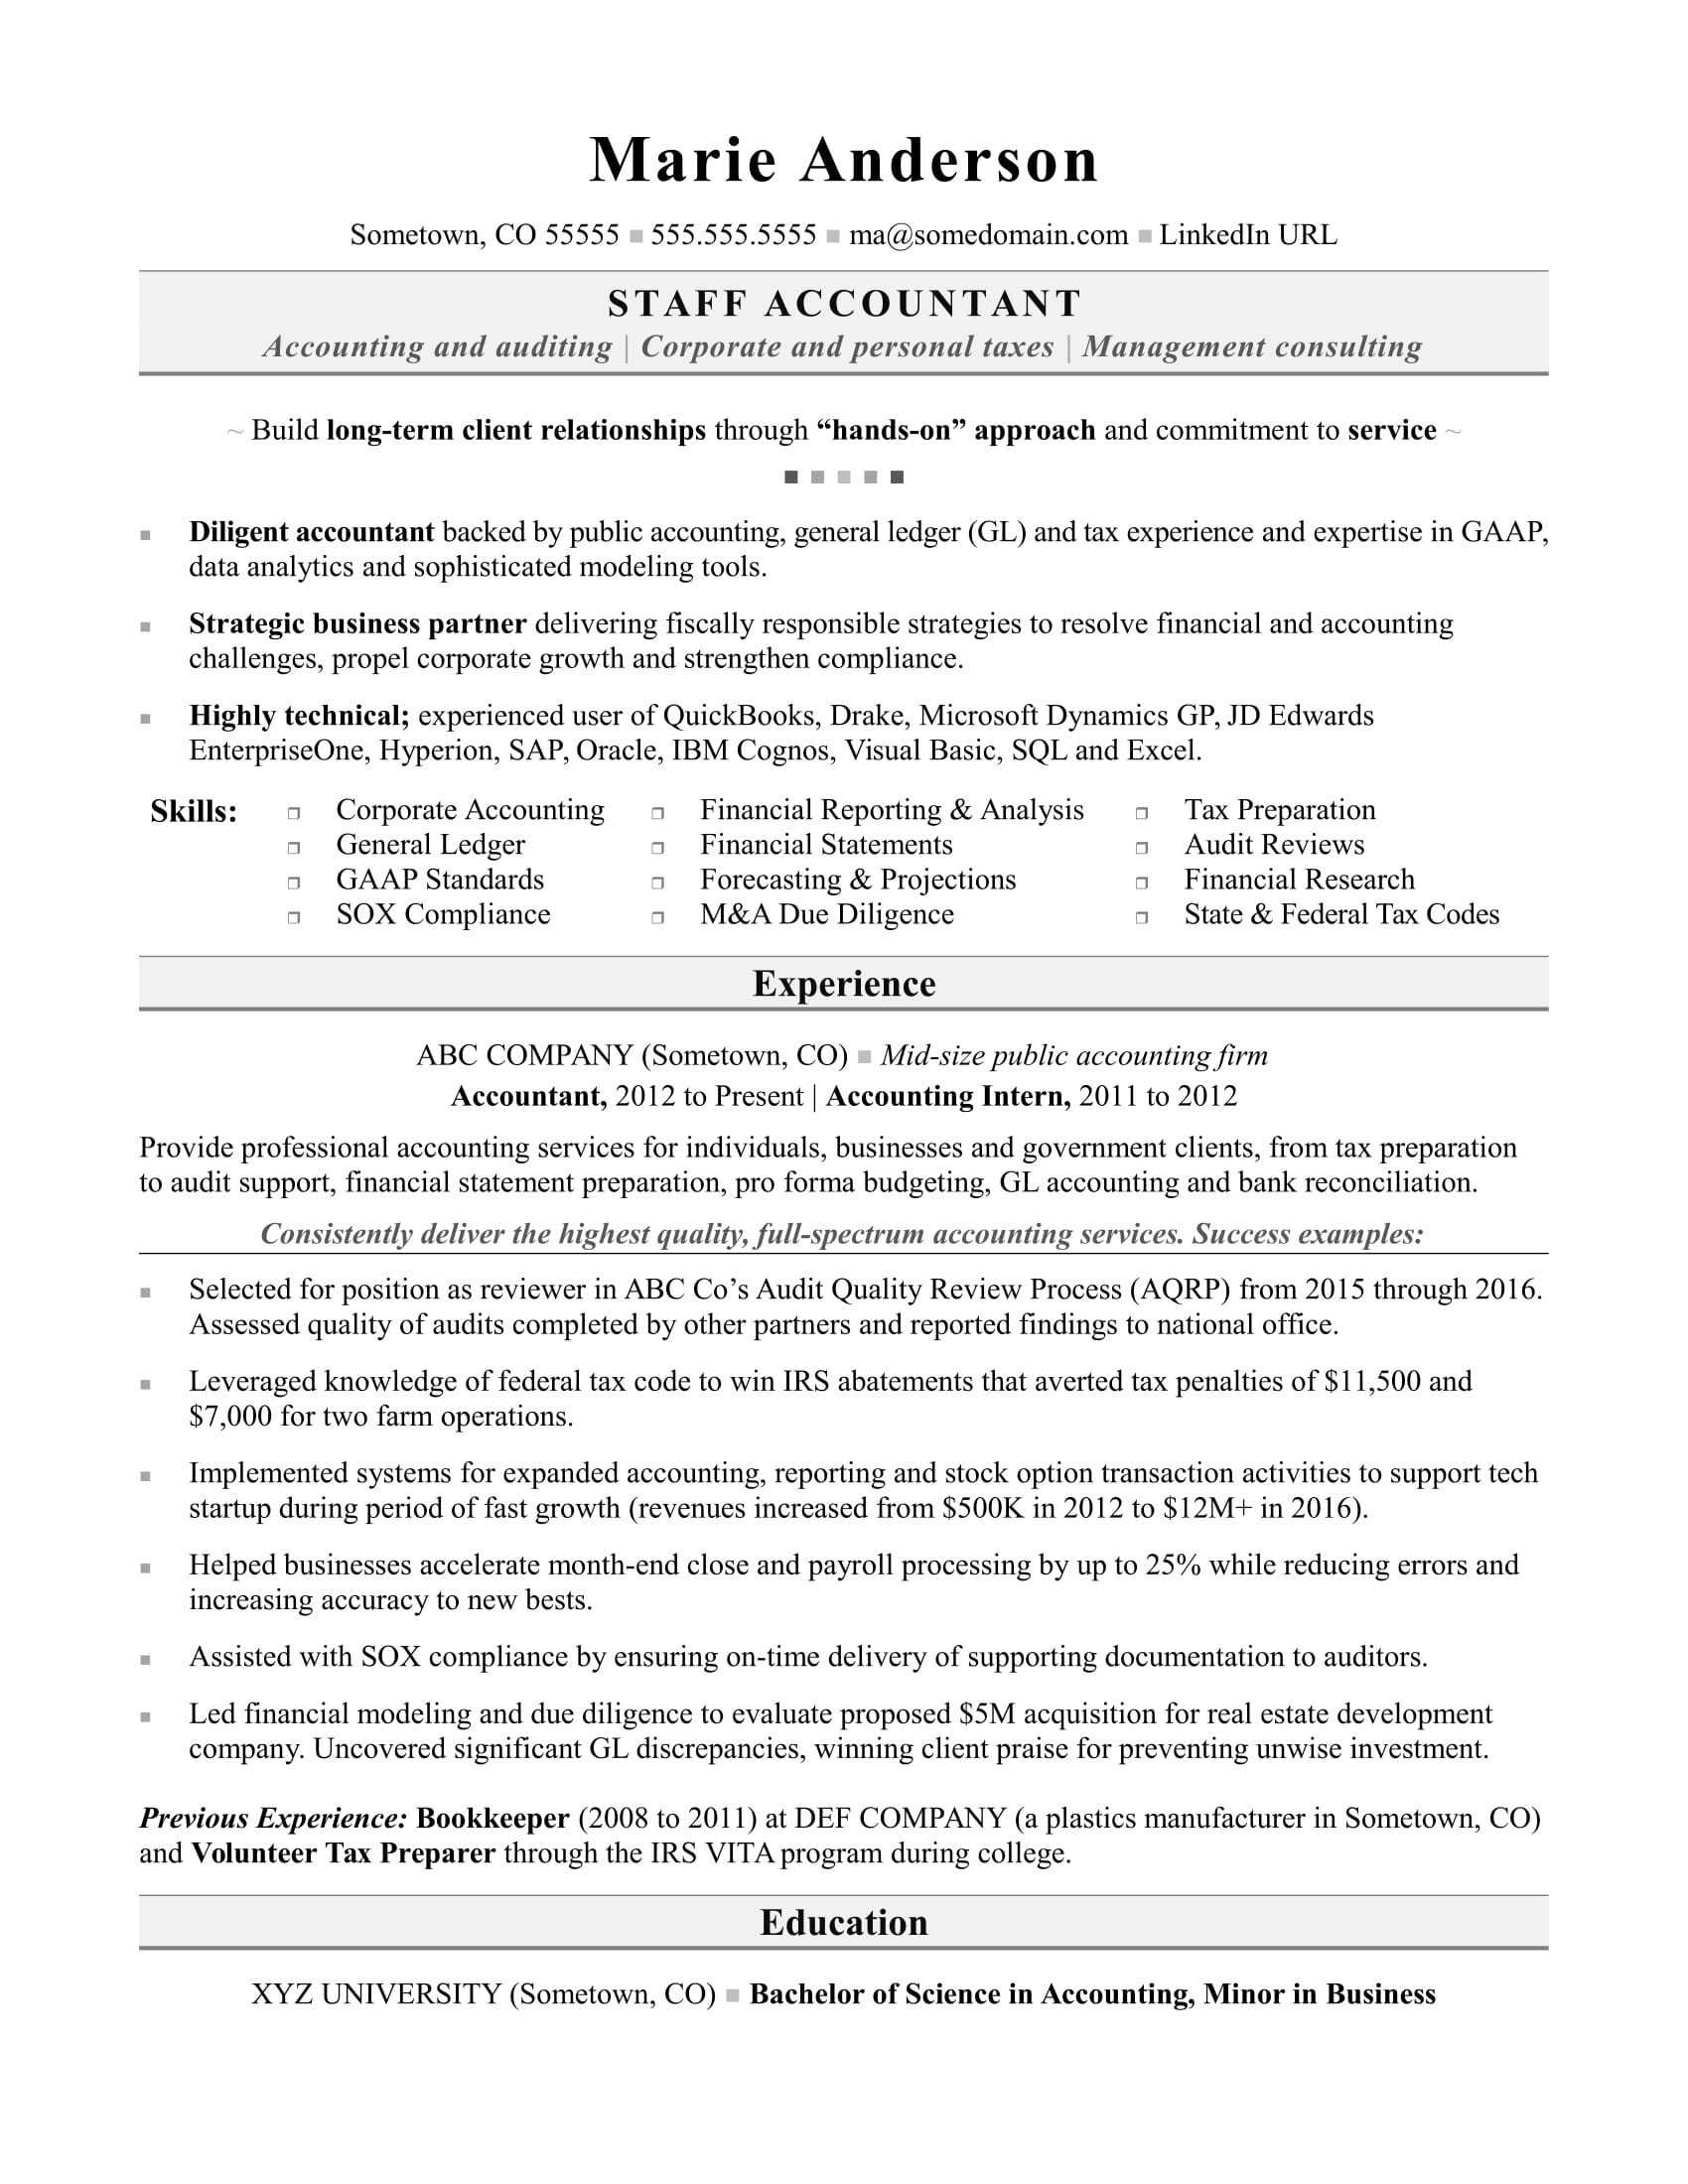 Sample Accounting Management Of Staff On Resume Accountant Resume Monster.com